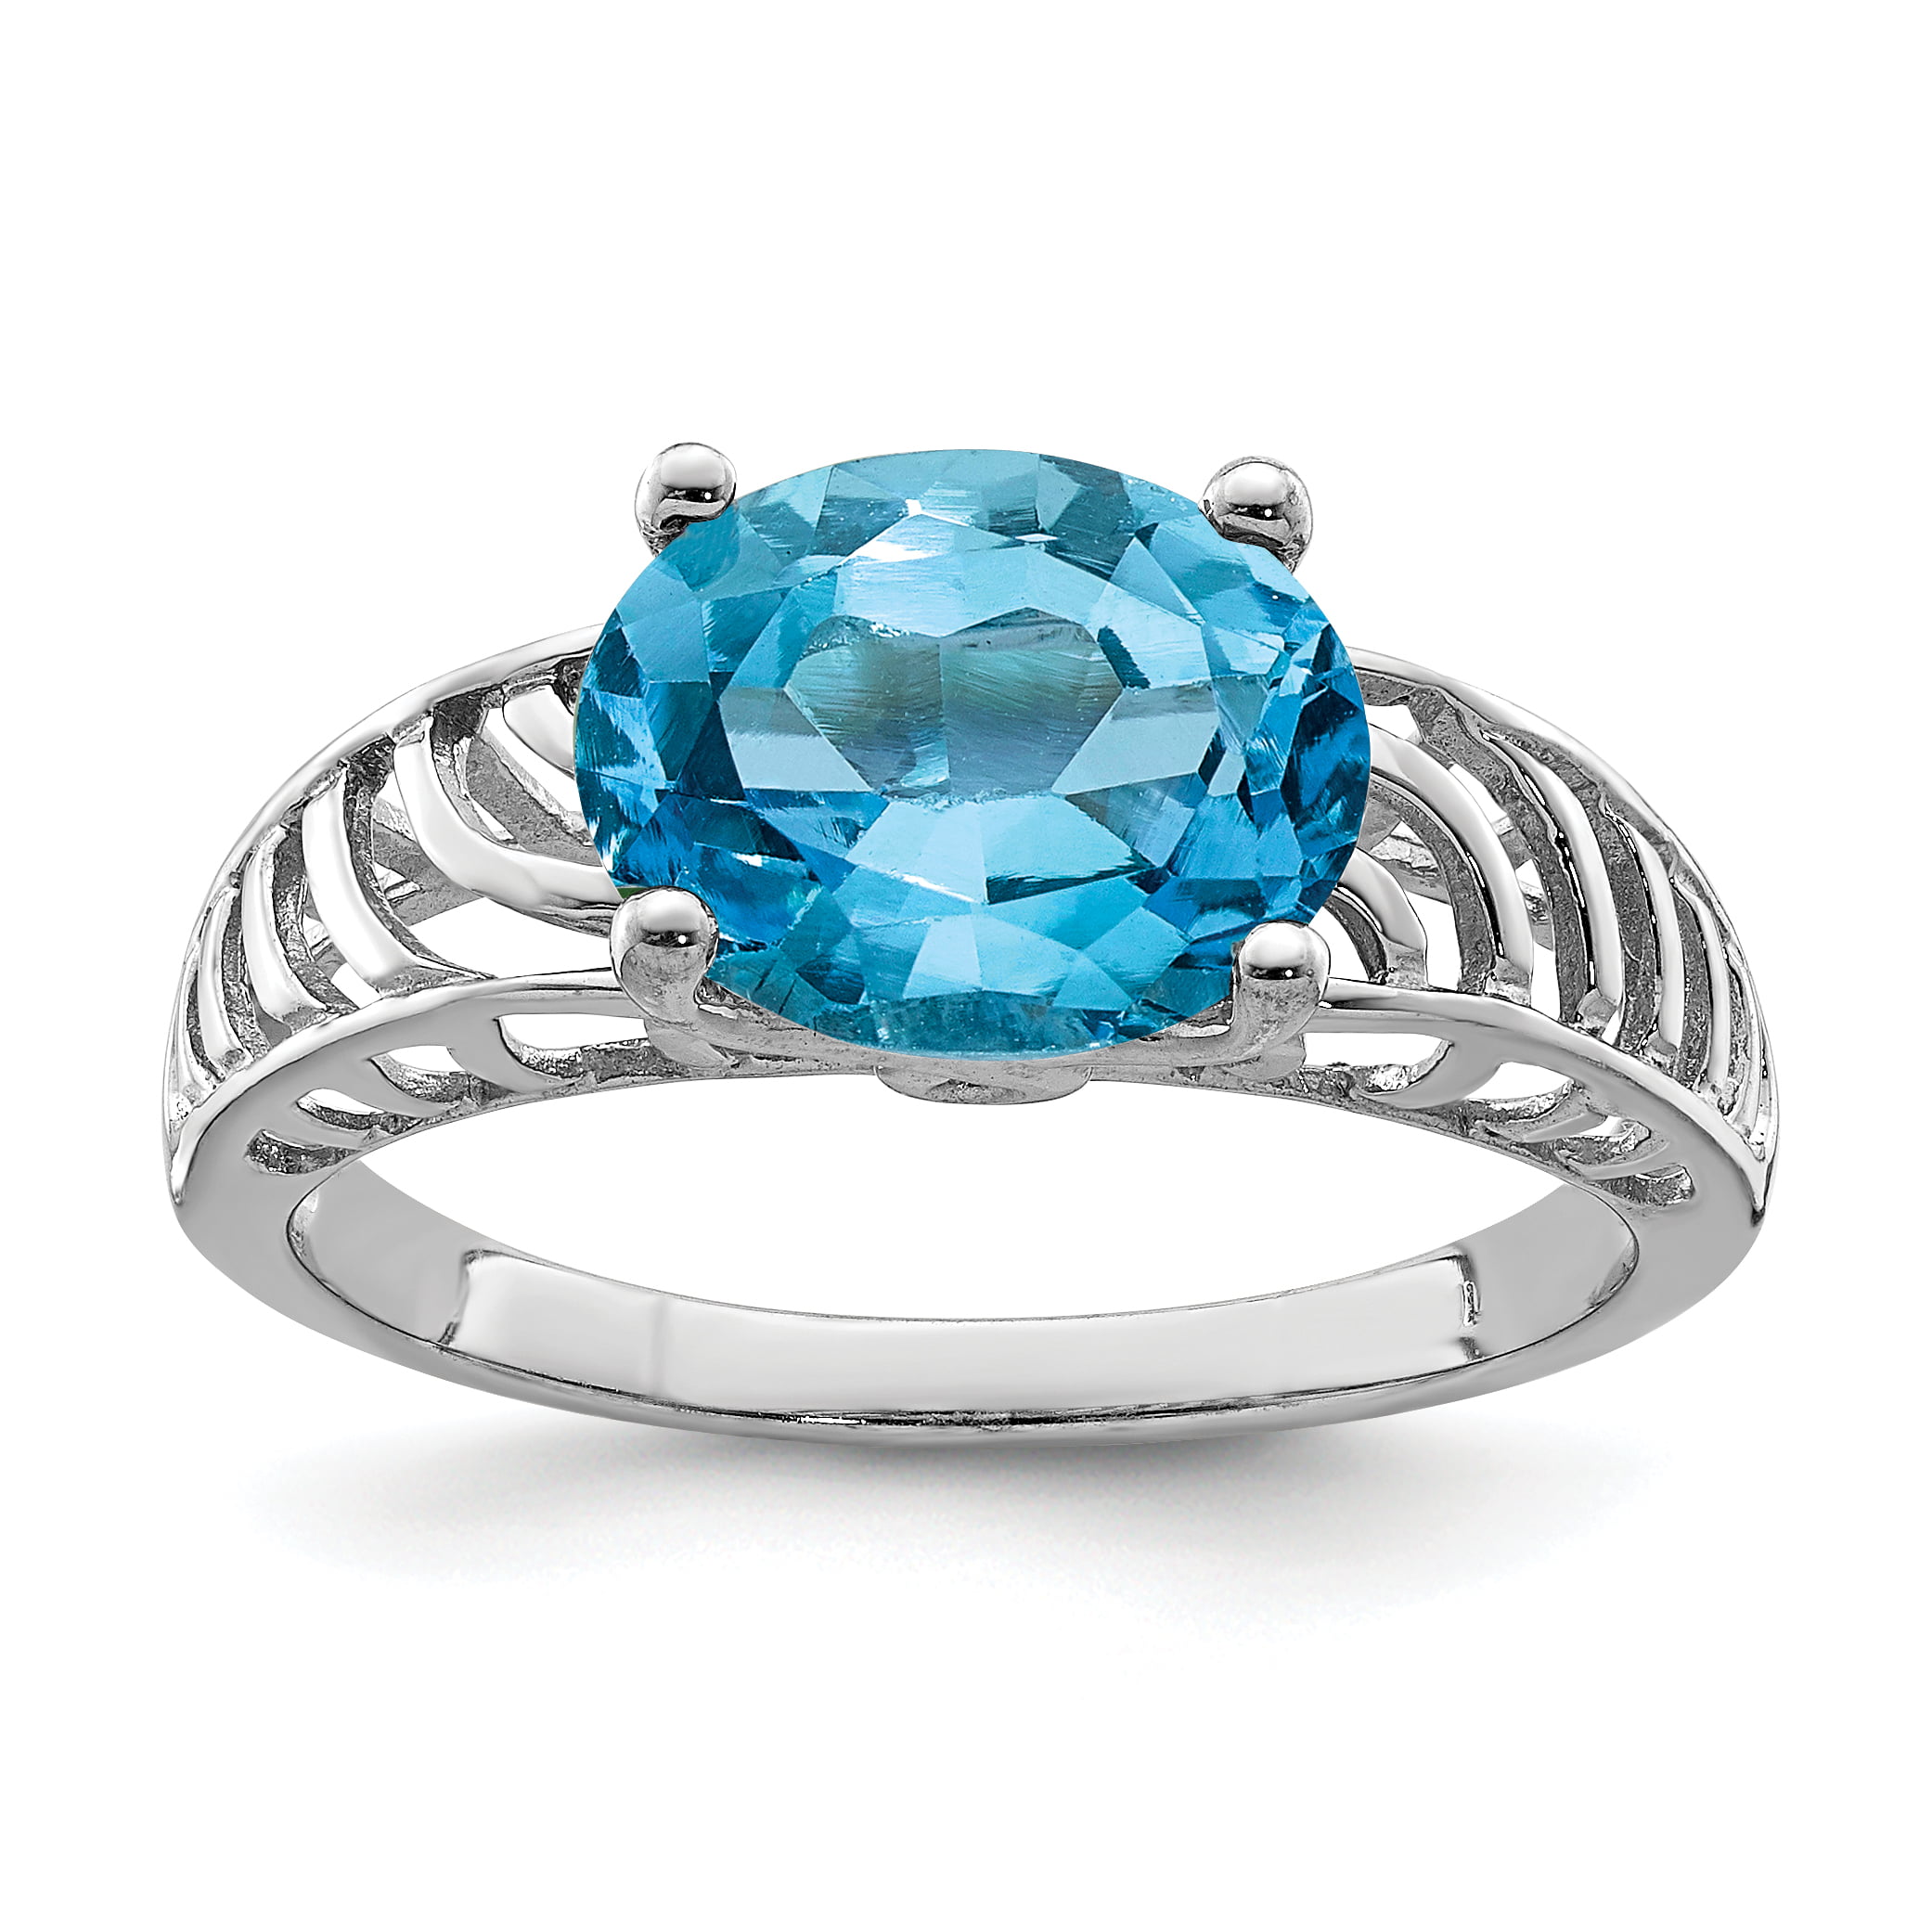 925 Sterling Silver Oval Swiss Blue Topaz Diamond Band Ring Size 7.00 Gemstone Fine Jewelry For Women Gifts For Her